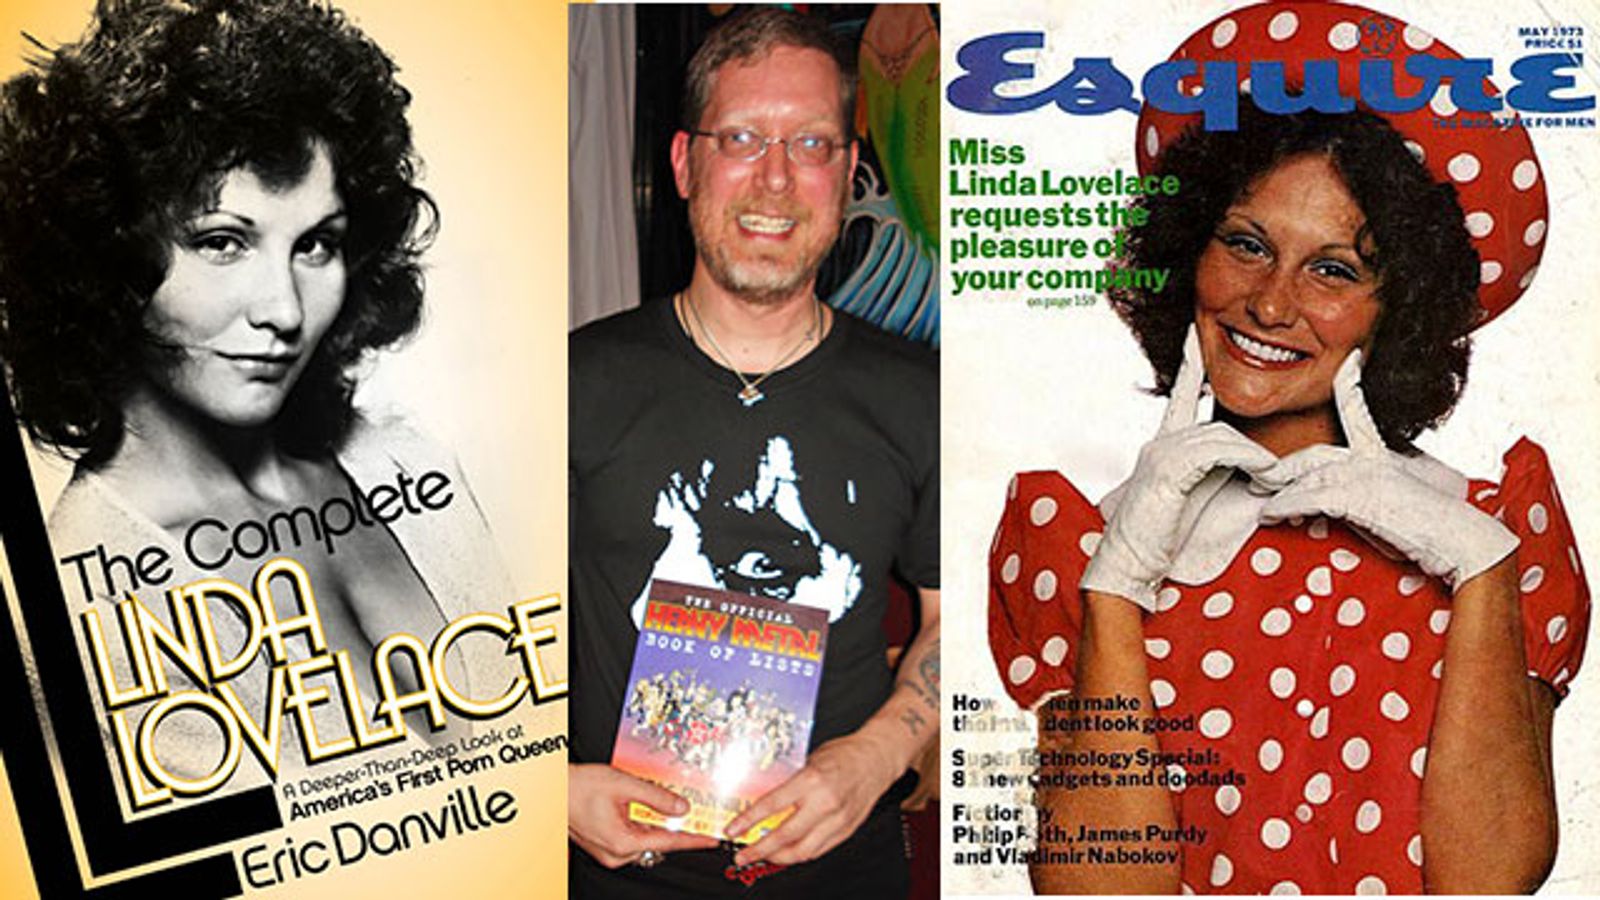 Meet Eric Danville, Author of 'The Complete Linda Lovelace', at AEE